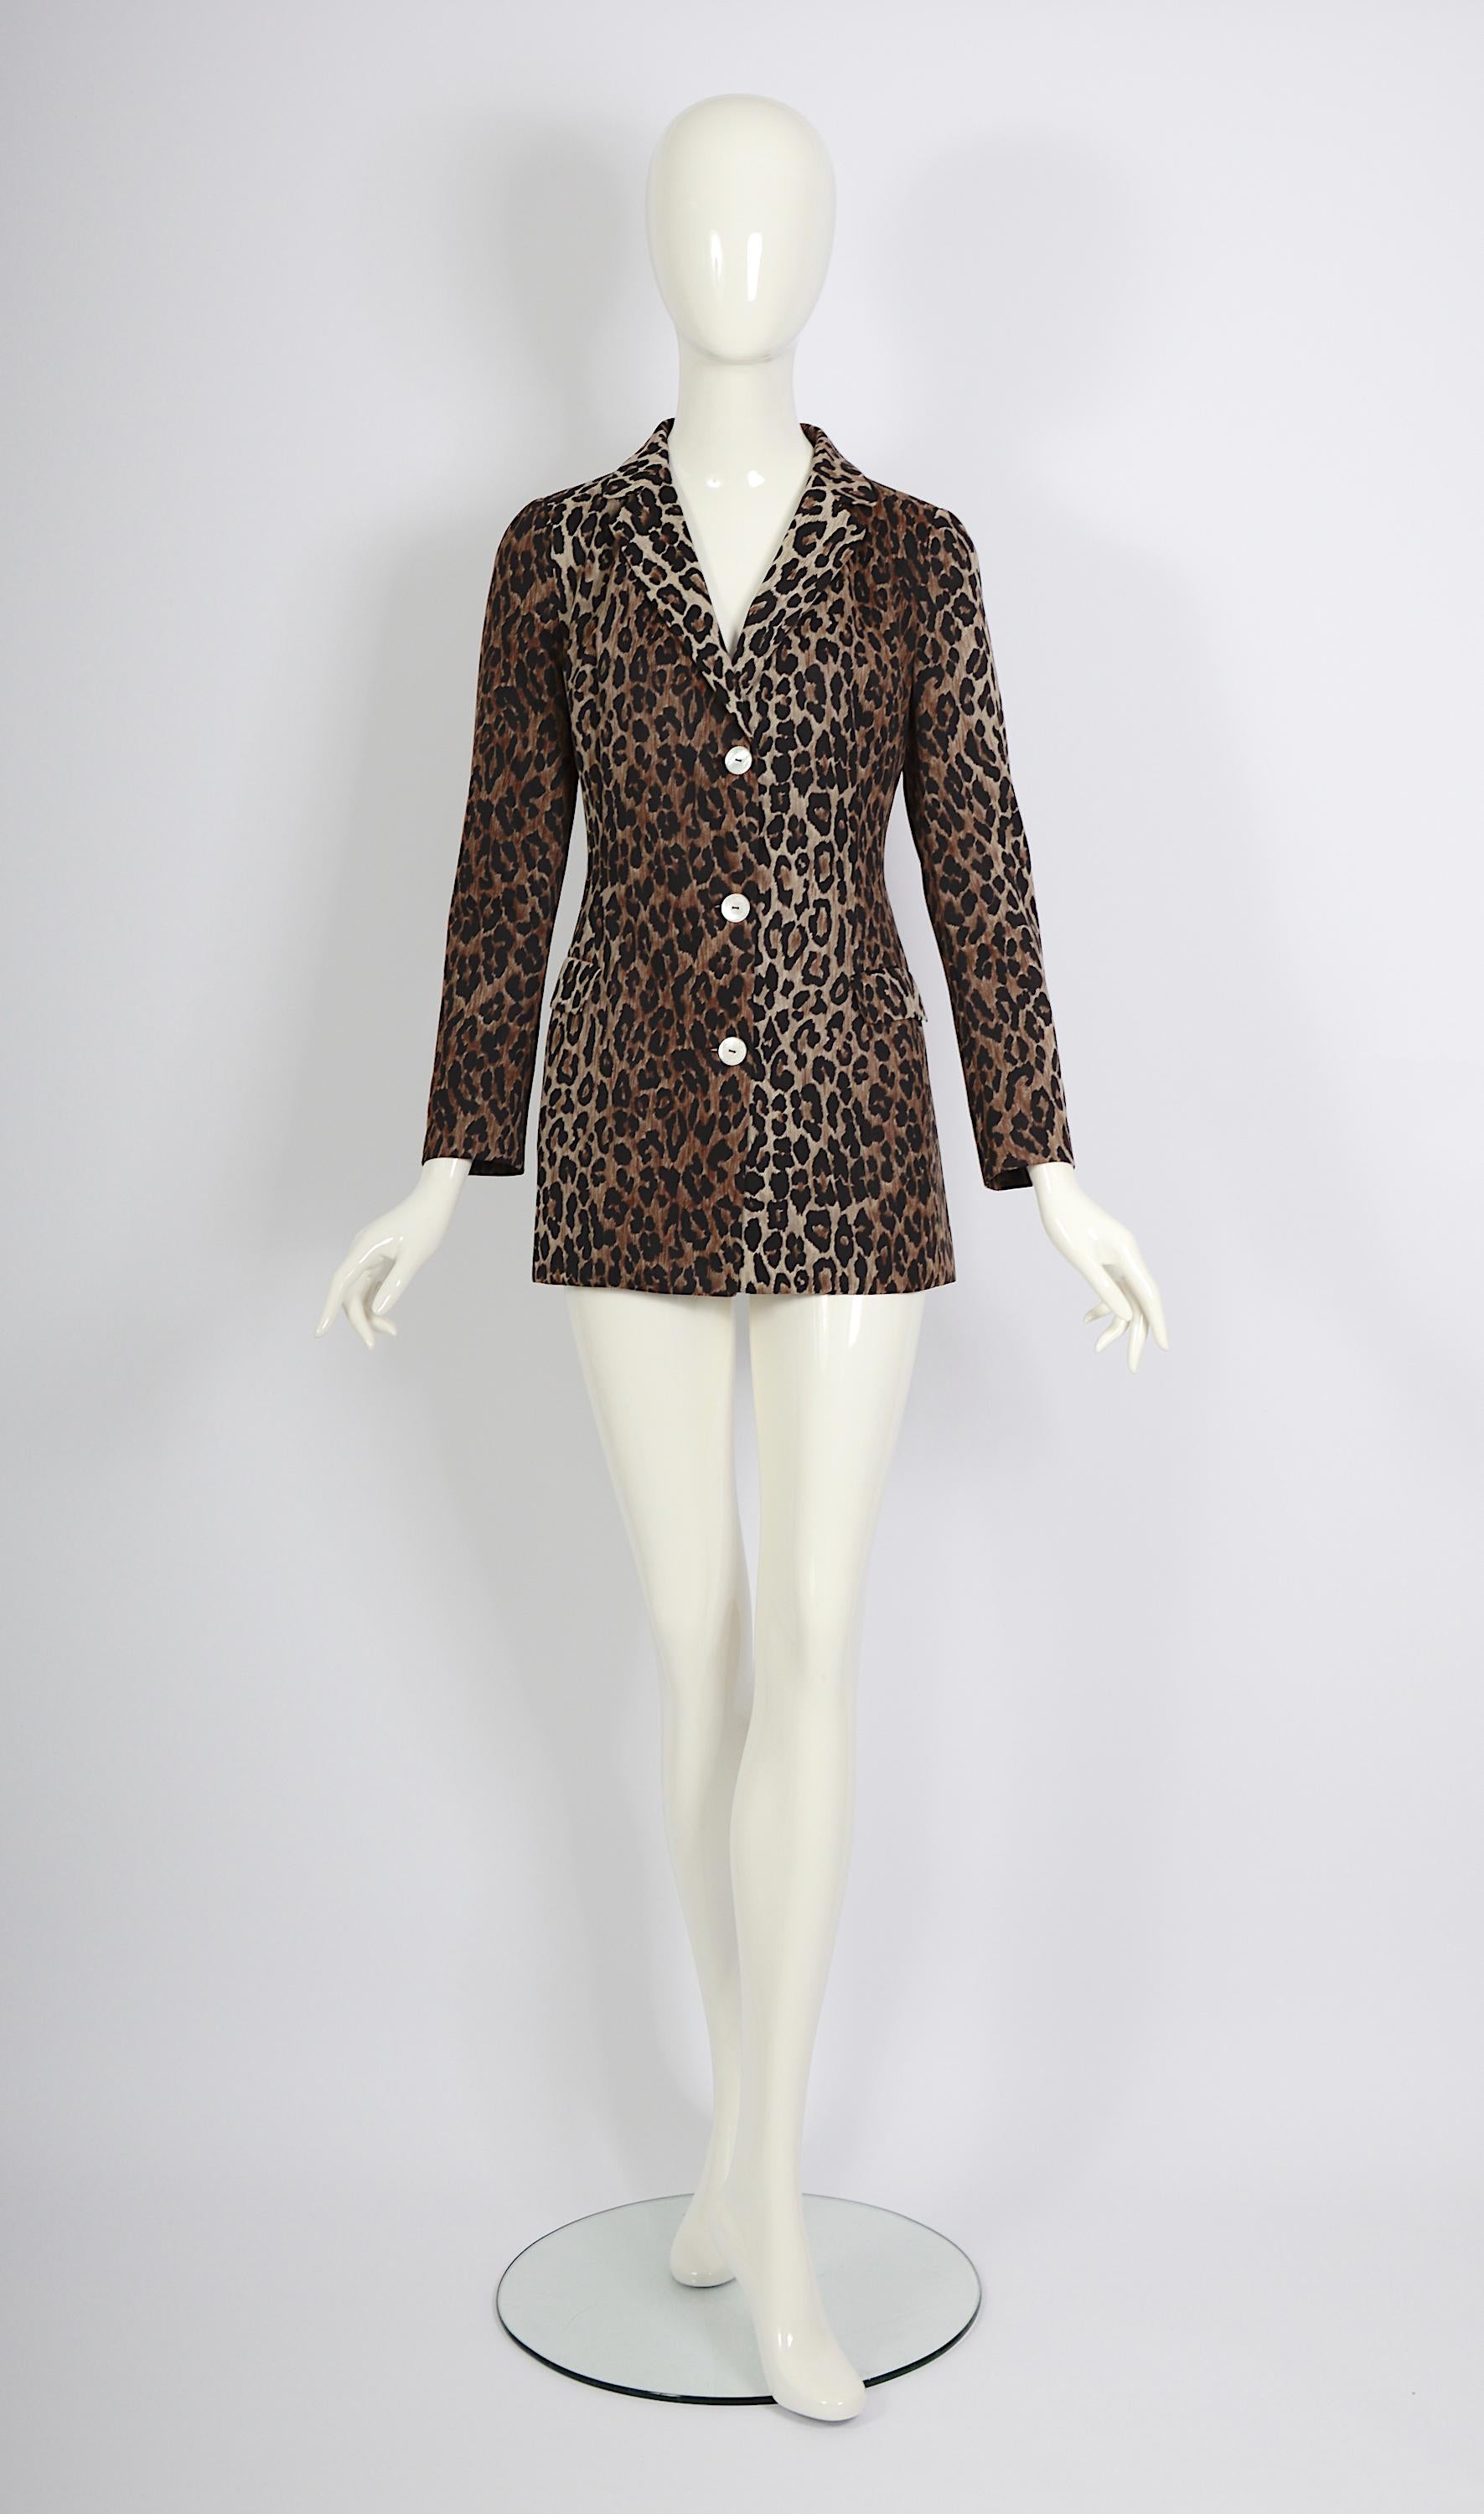 Dolce & Gabbana spring summer 1997 runway nylon leopard print jacket In Excellent Condition For Sale In Antwerp, BE